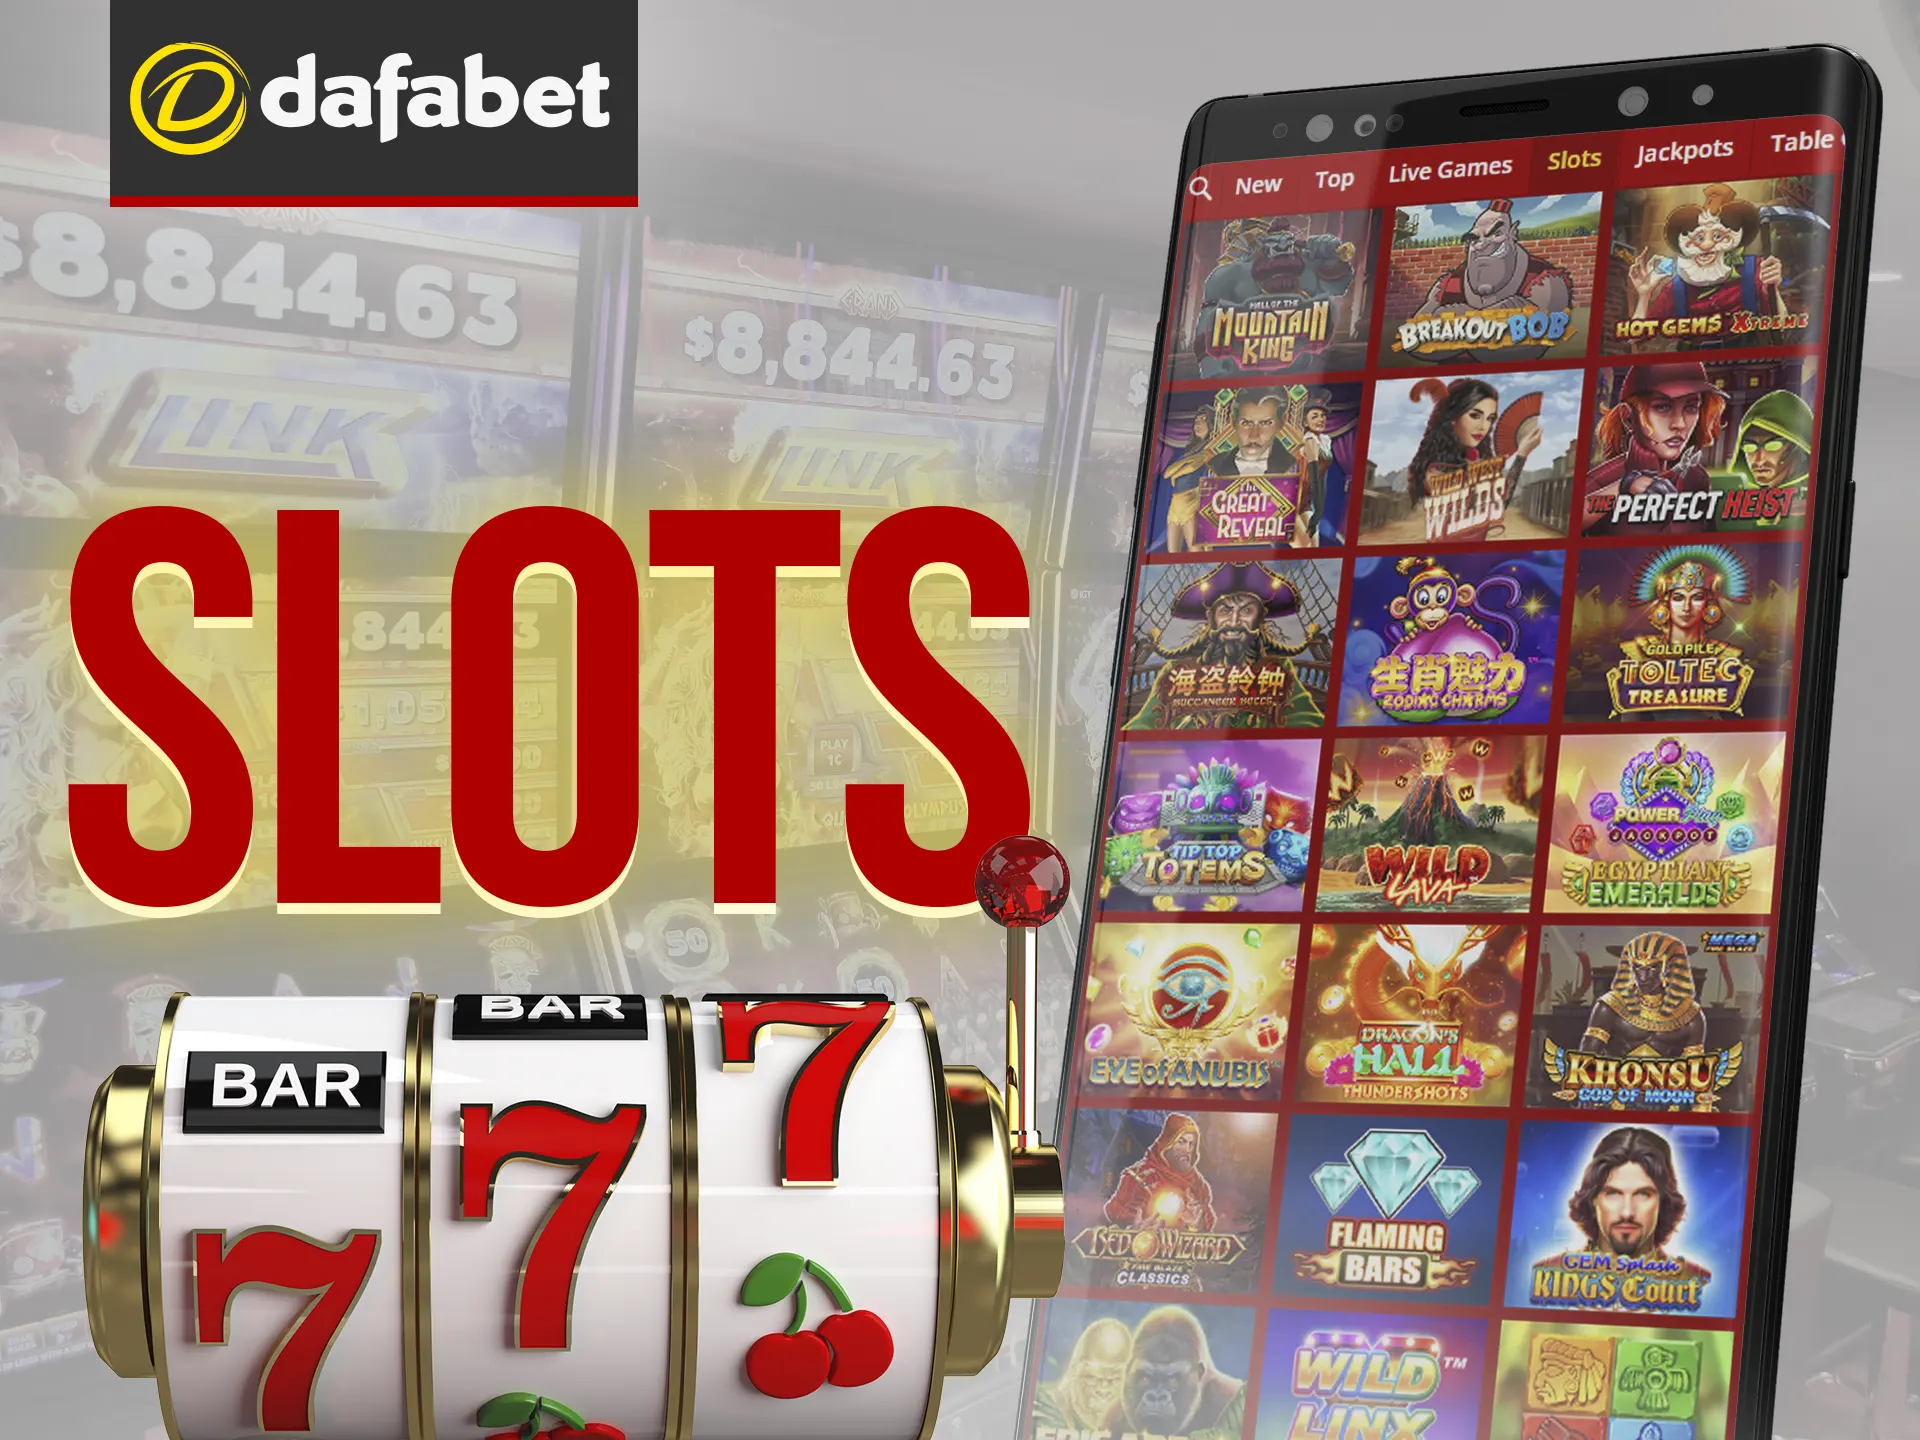 Dafabet provides a huge range of slots by known providers for mobile gambling.